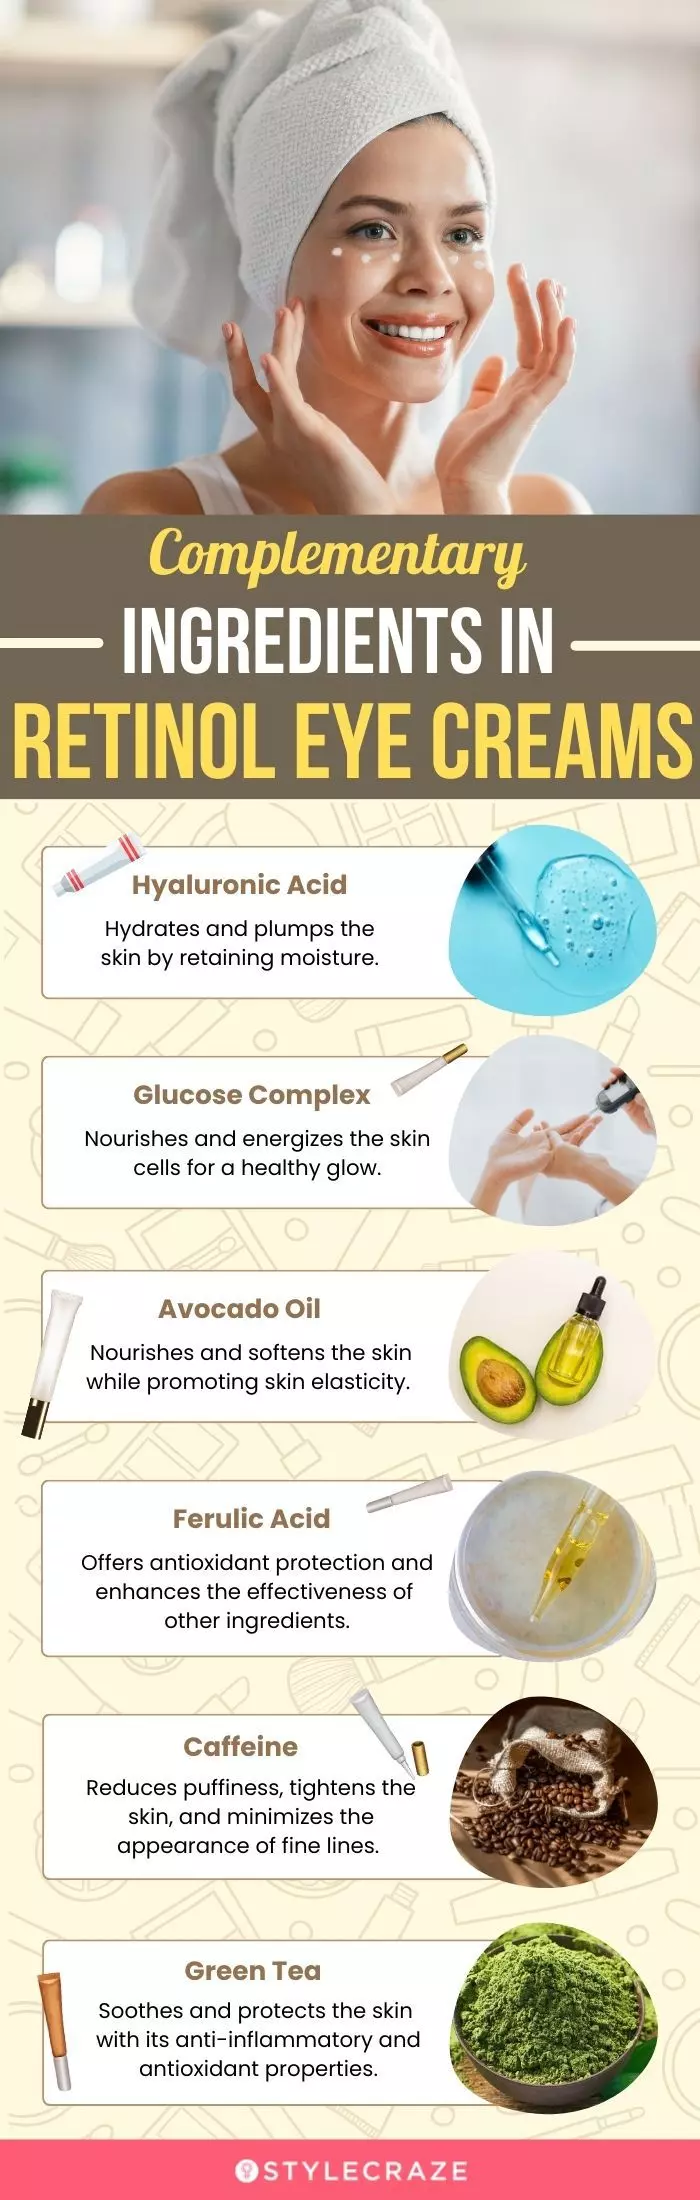 Complementary Ingredients In Retinol Eye Creams (infographic)